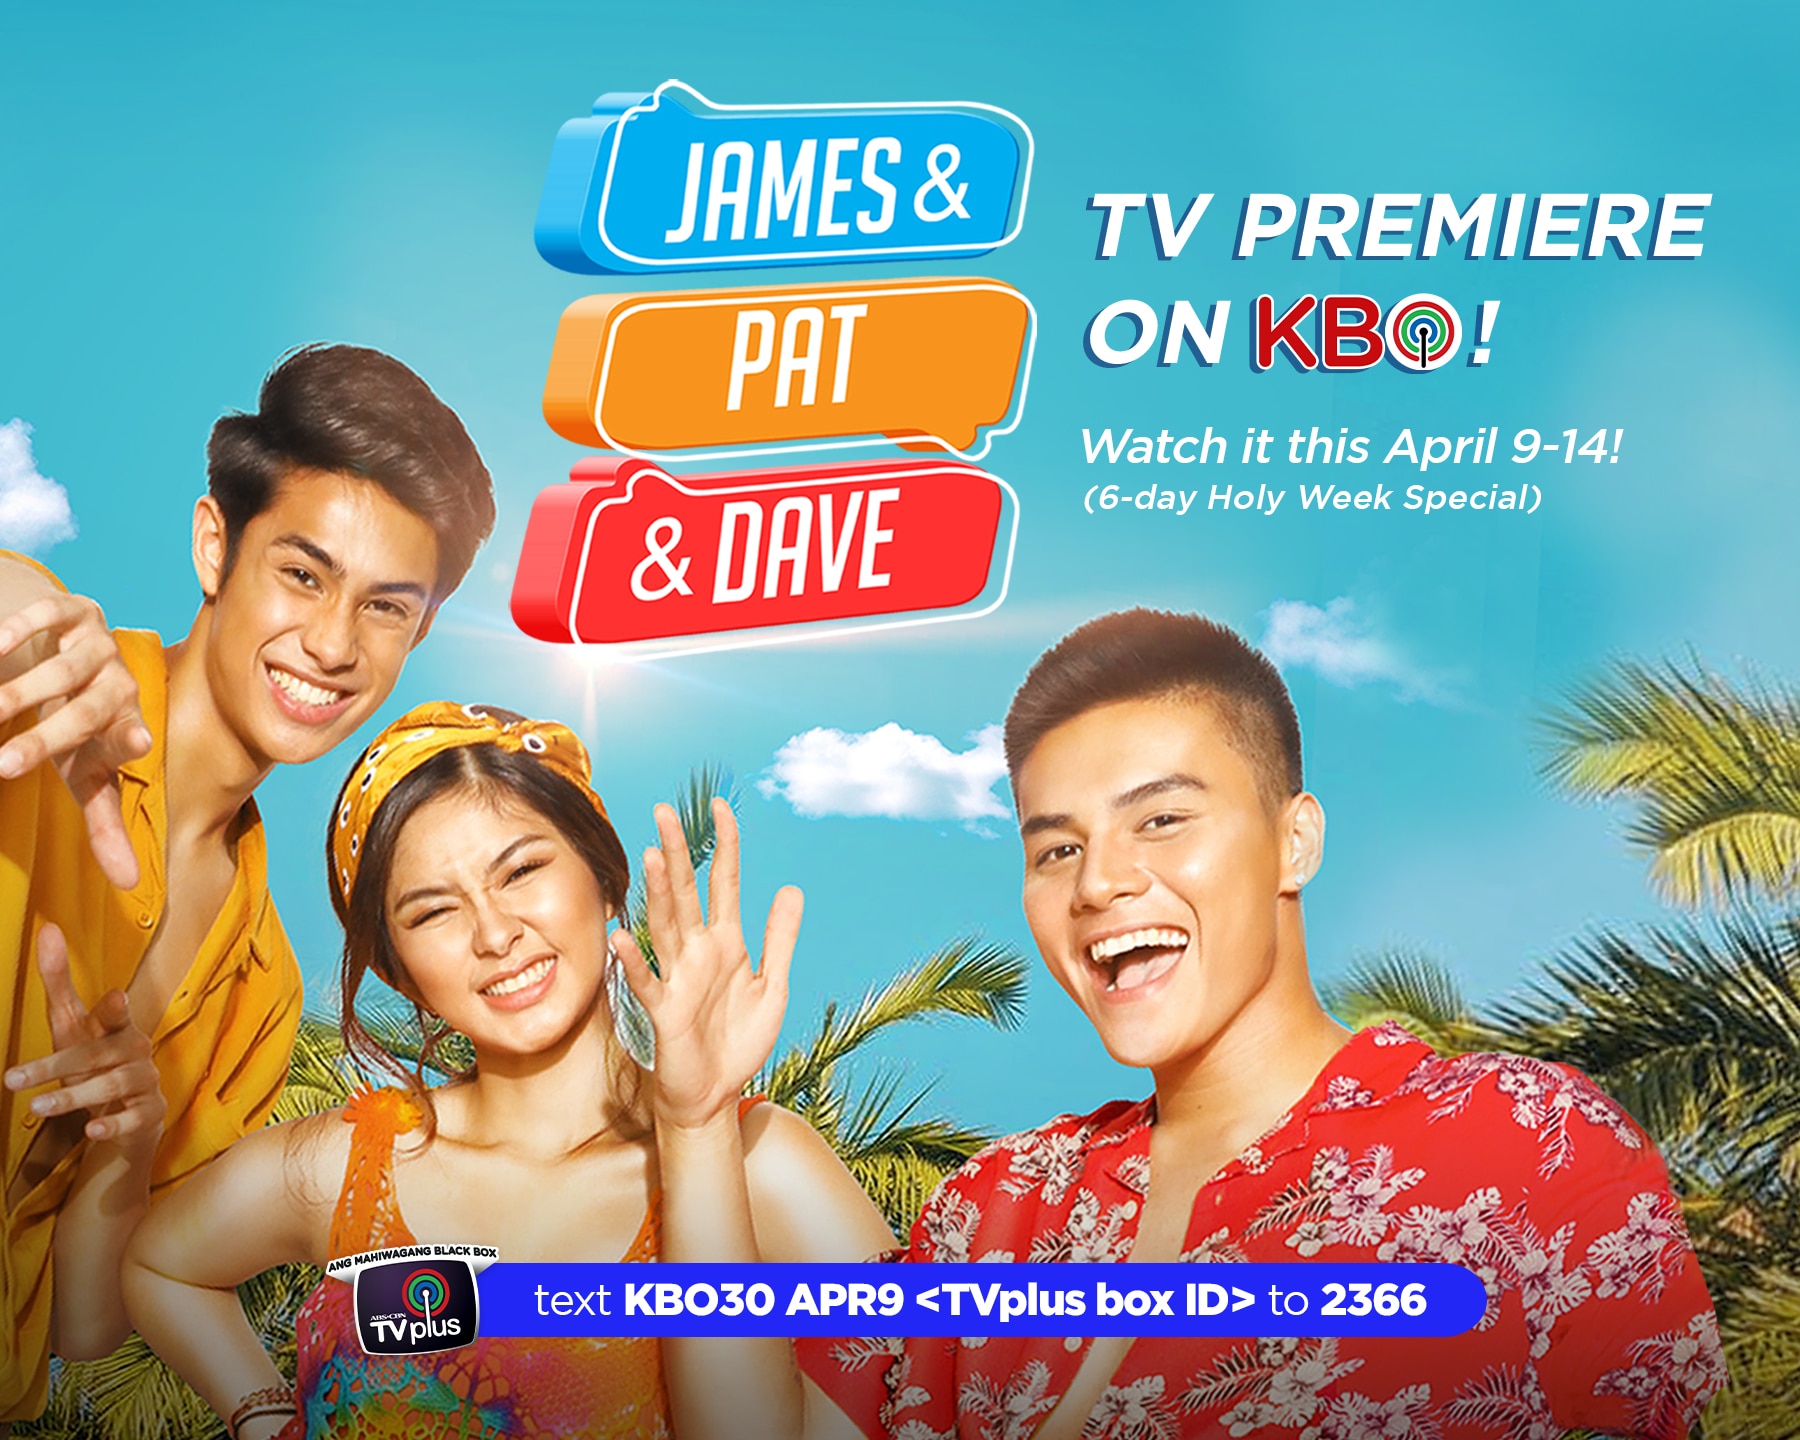 Ronnie and Loisa's "James and Pat and Dave," premieres on KBO this Holy Week